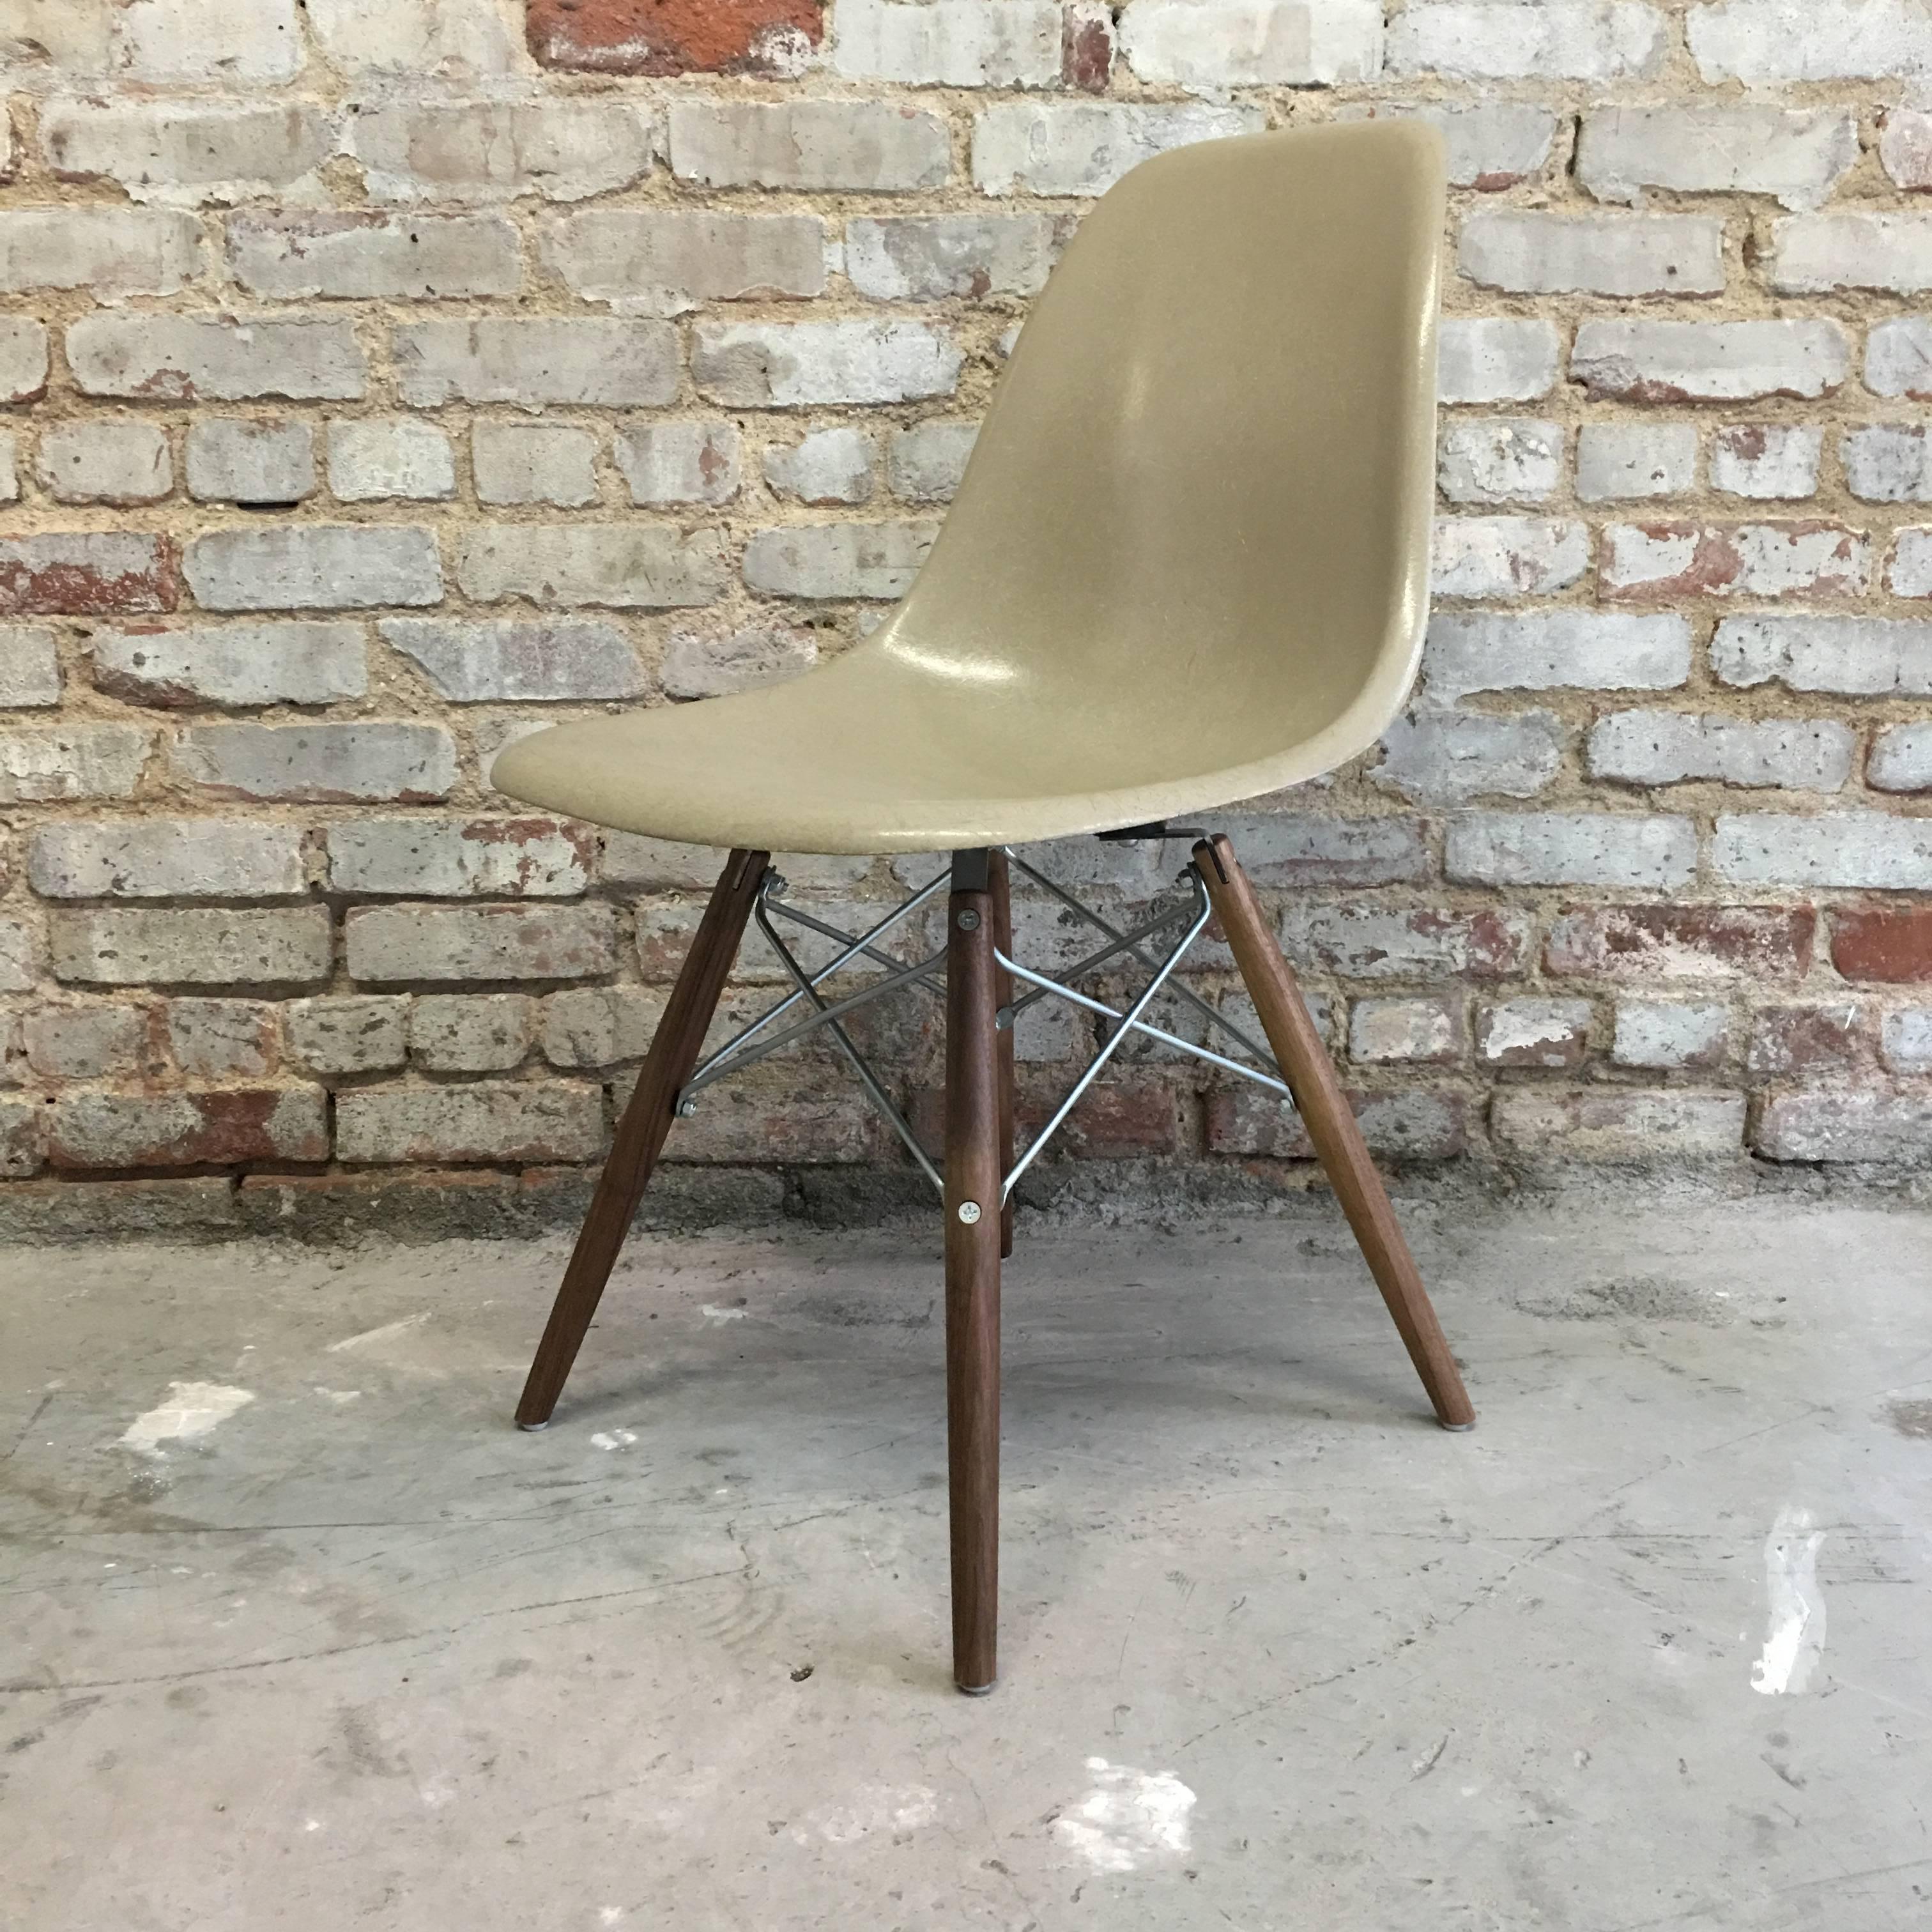 Herman Miller Eames DSW dining chair in Greige. Excellent condition with new Modern Conscience base. Sold in sets of 6, 8, 10, or 12. Wood legs available in maple, birch, or walnut (pictured). Metal available in black or zinc (pictured).